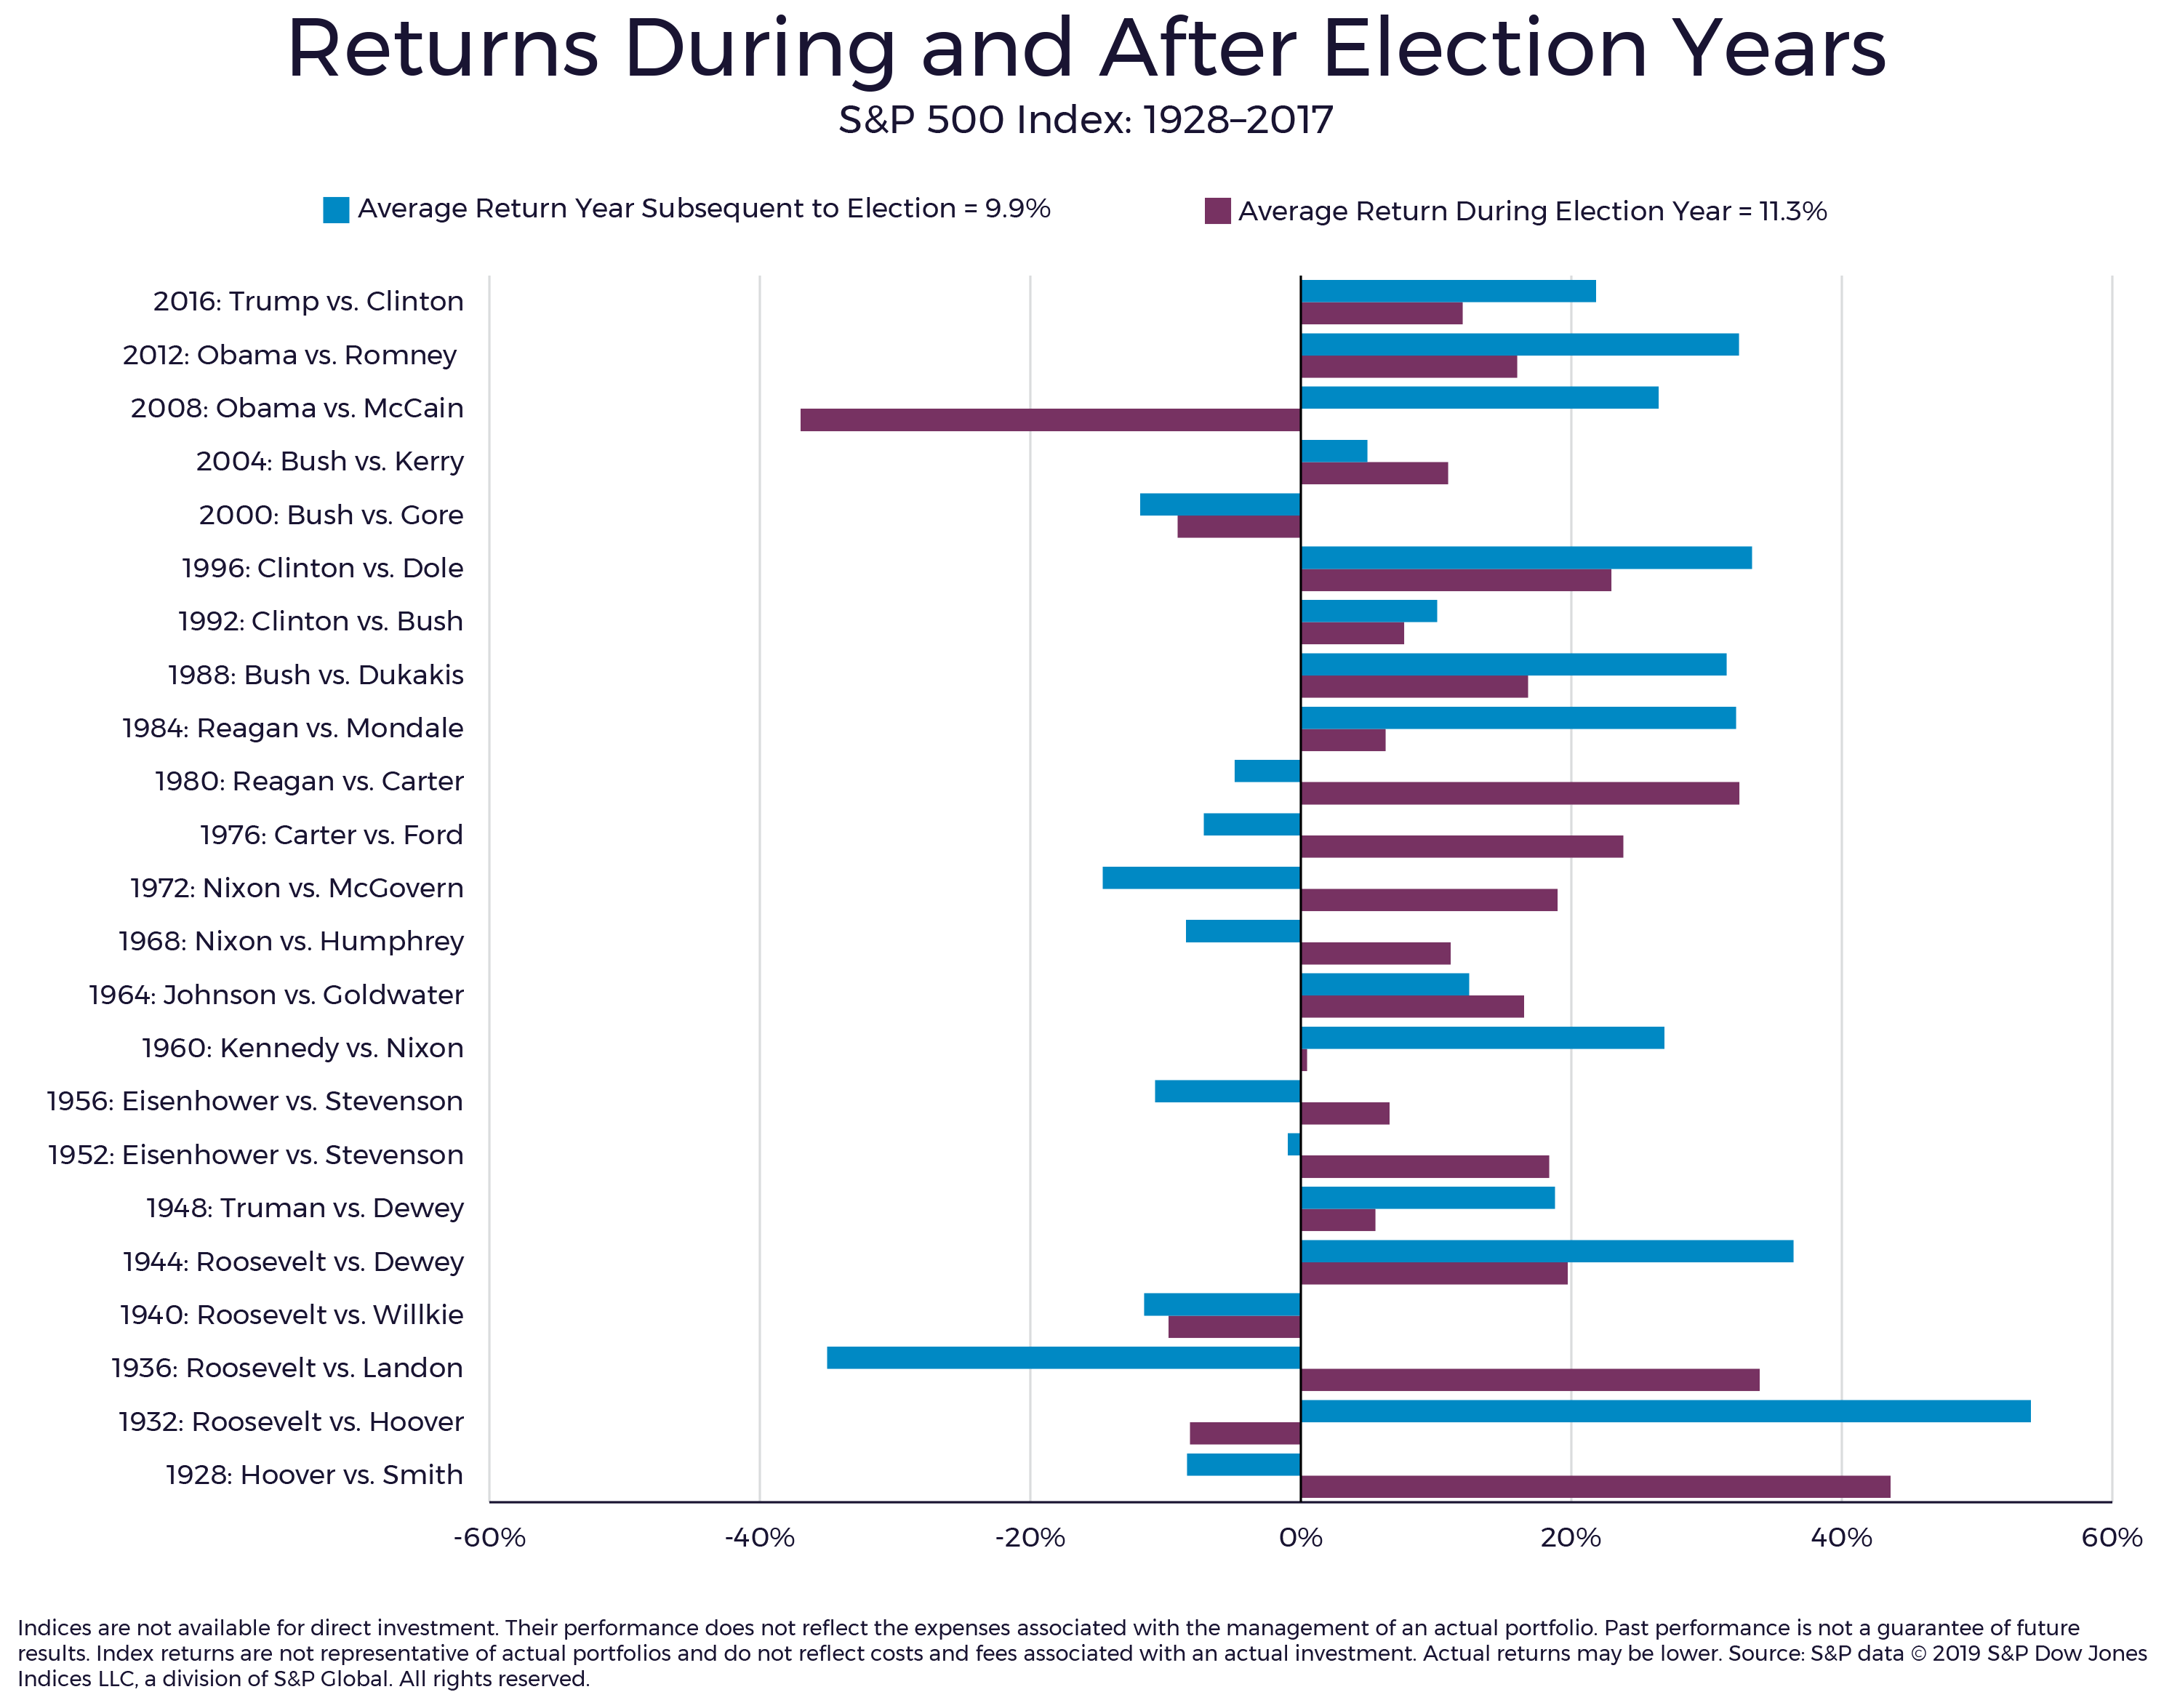 Returns During and After Election Years